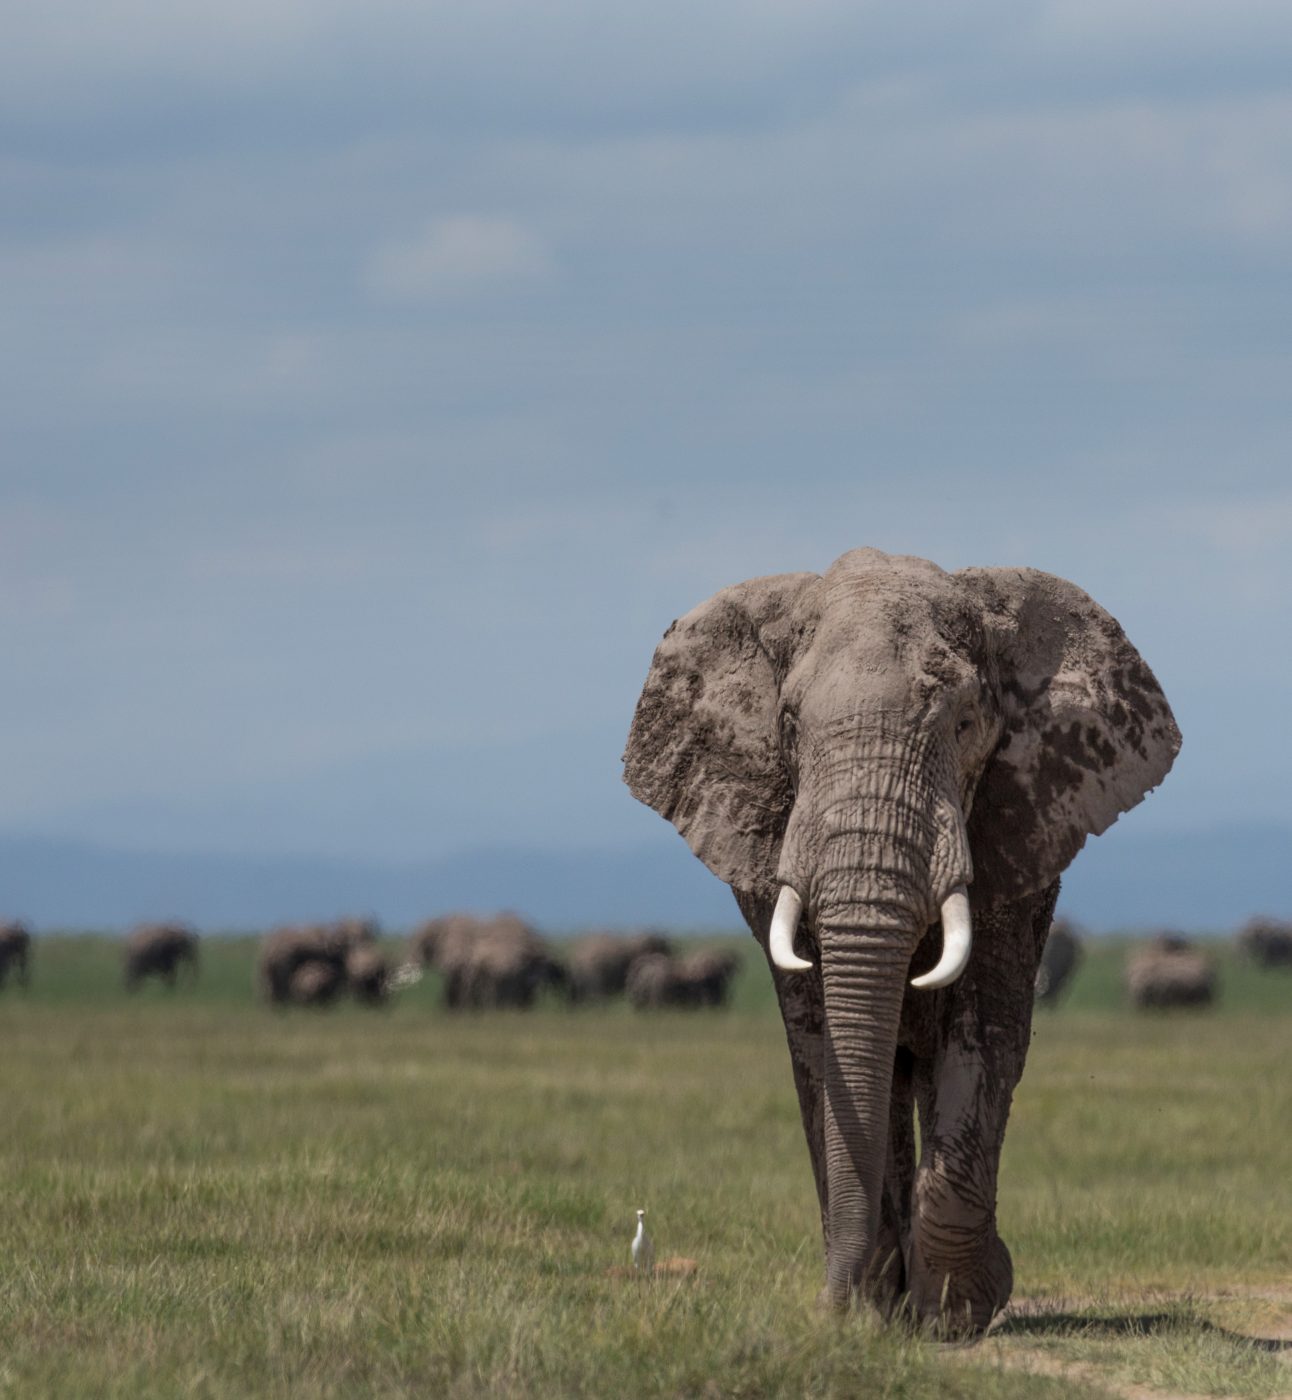 An African Elephant stands alone with a savannah background